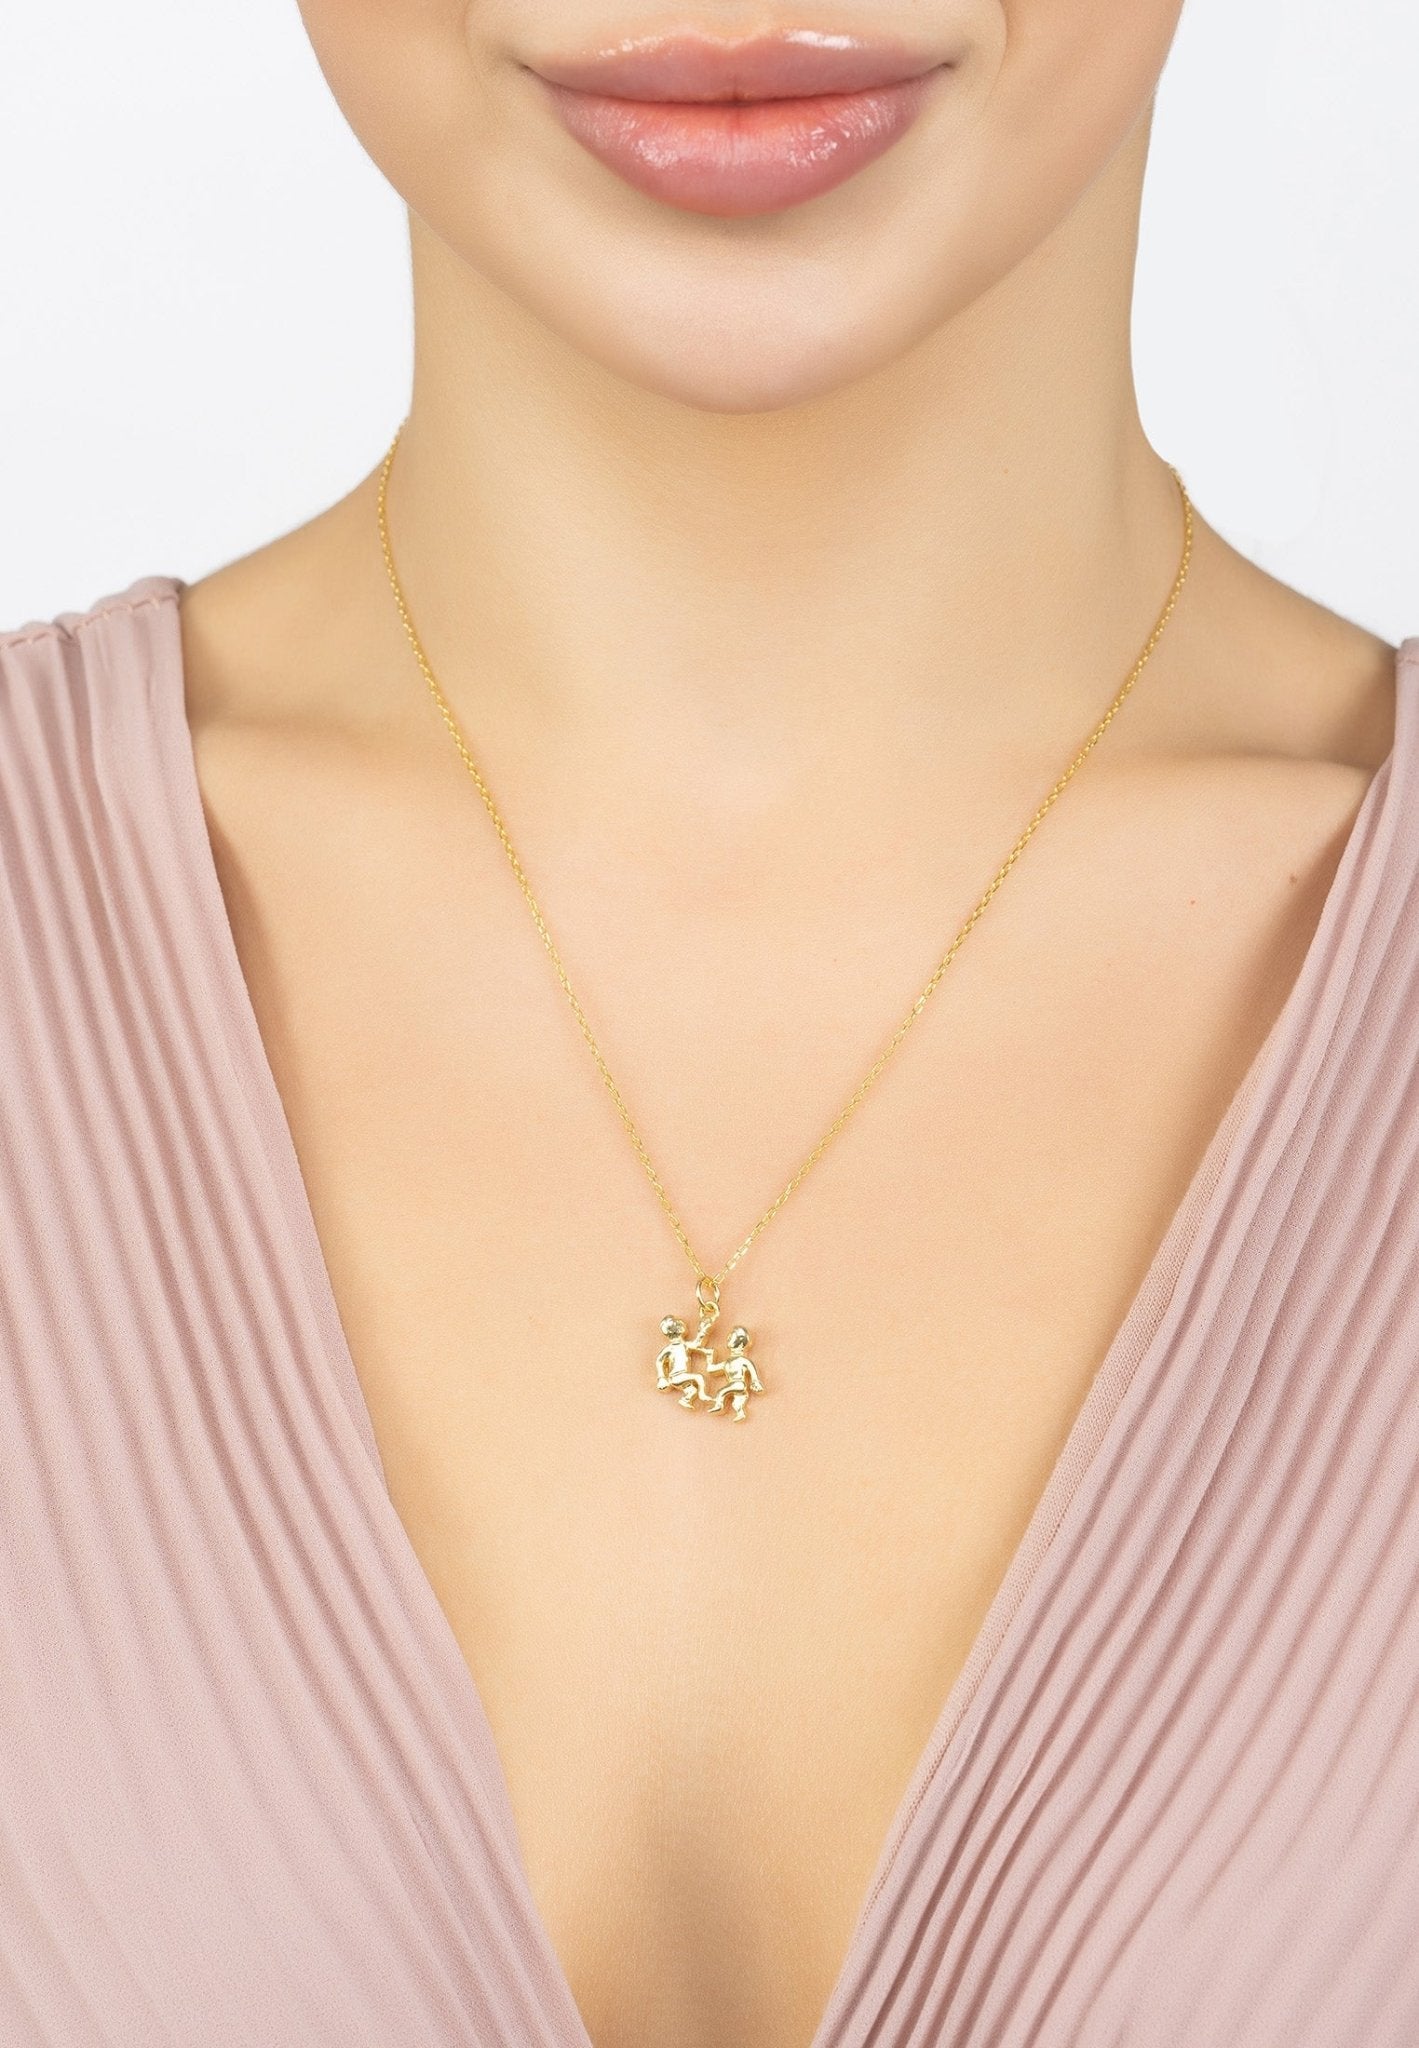 Personalized Necklaces - Zodiac Gemini Star Sign Necklace Gold 